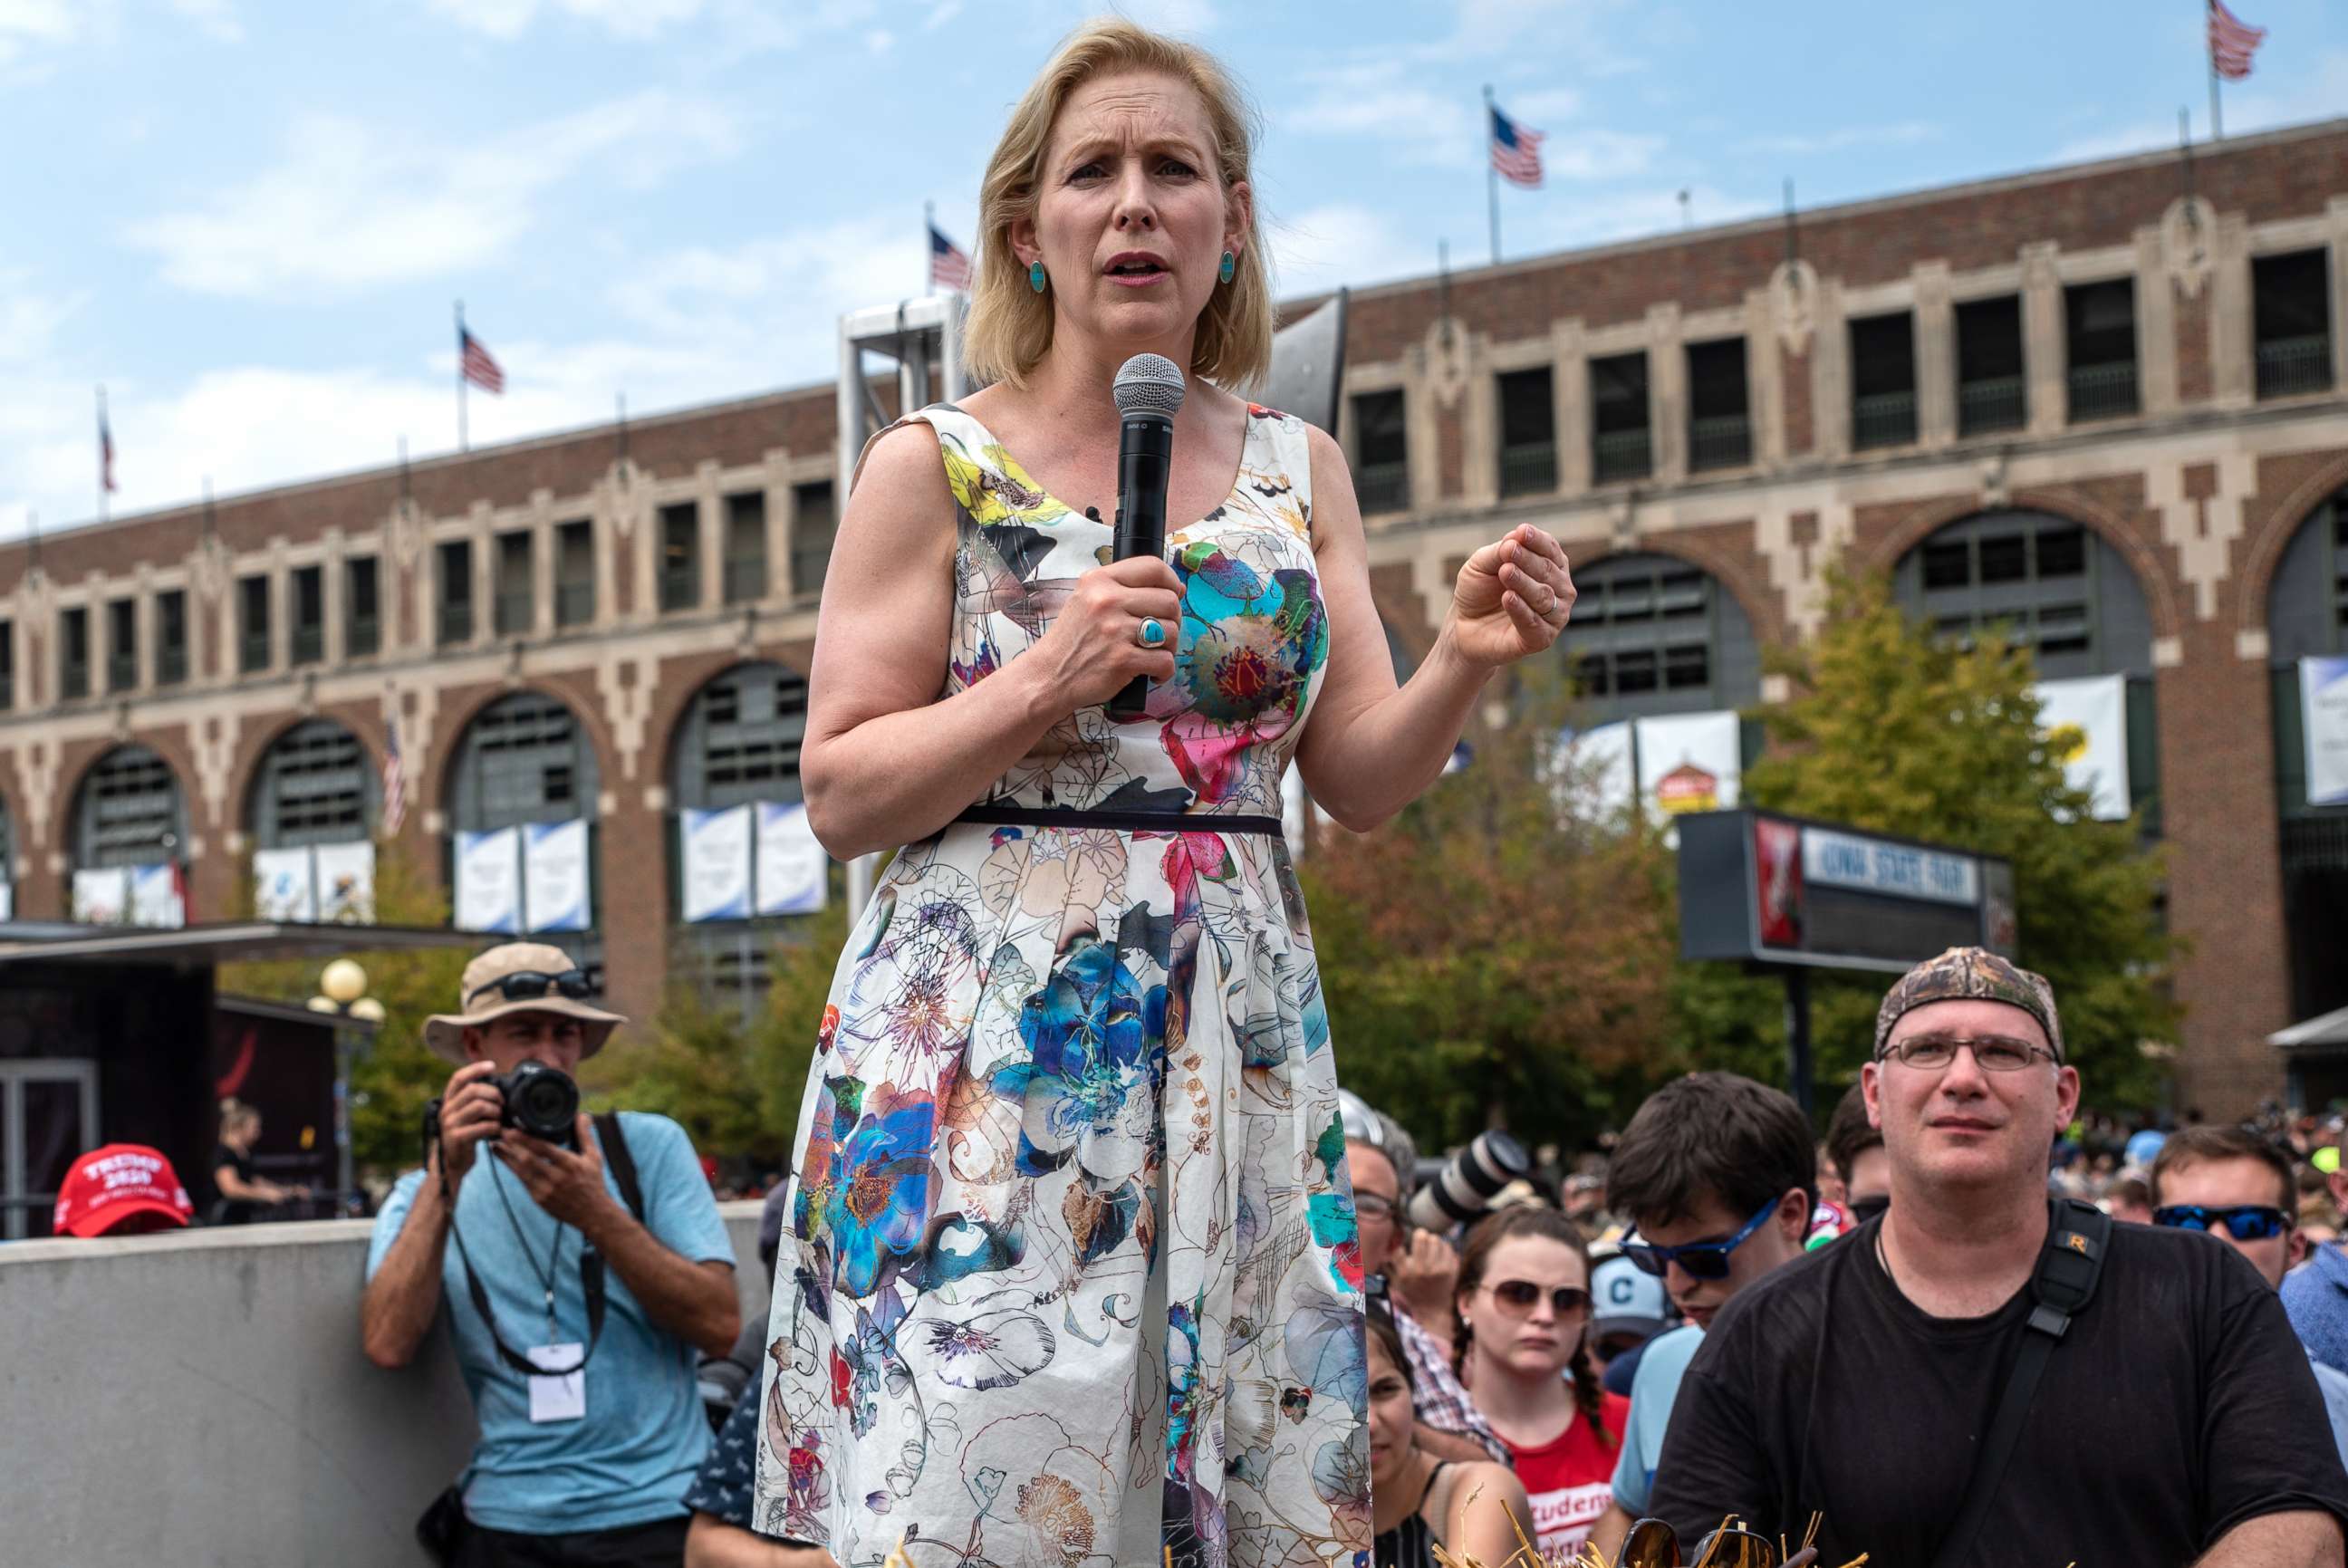 PHOTO: Democratic presidential candidate U.S. Sen. Kirsten Gillibrand (D-NY) speaks to a crowd at the Iowa State Fair on August 10, 2019 in Des Moines, Iowa.